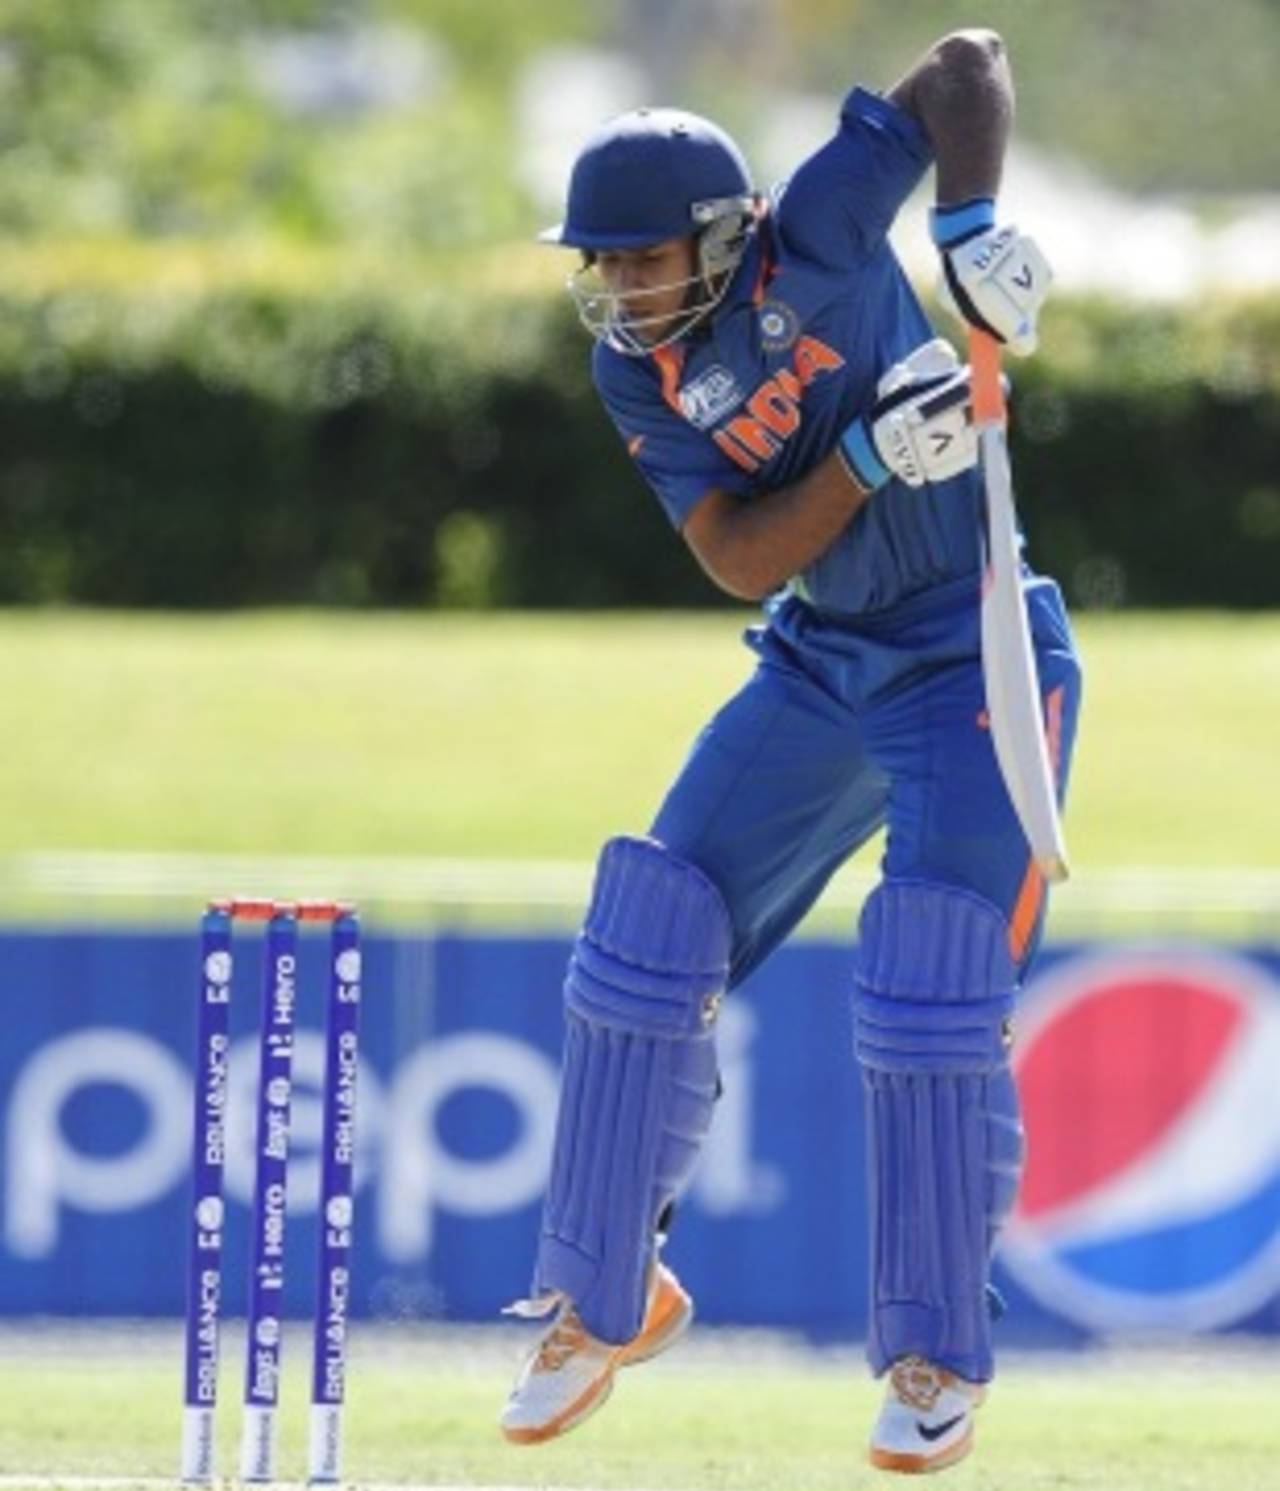 Hanuma Vihari fends a bouncer, India v West Indies, Group C, ICC Under-19 World Cup 2012, Townsville, August 12, 2012